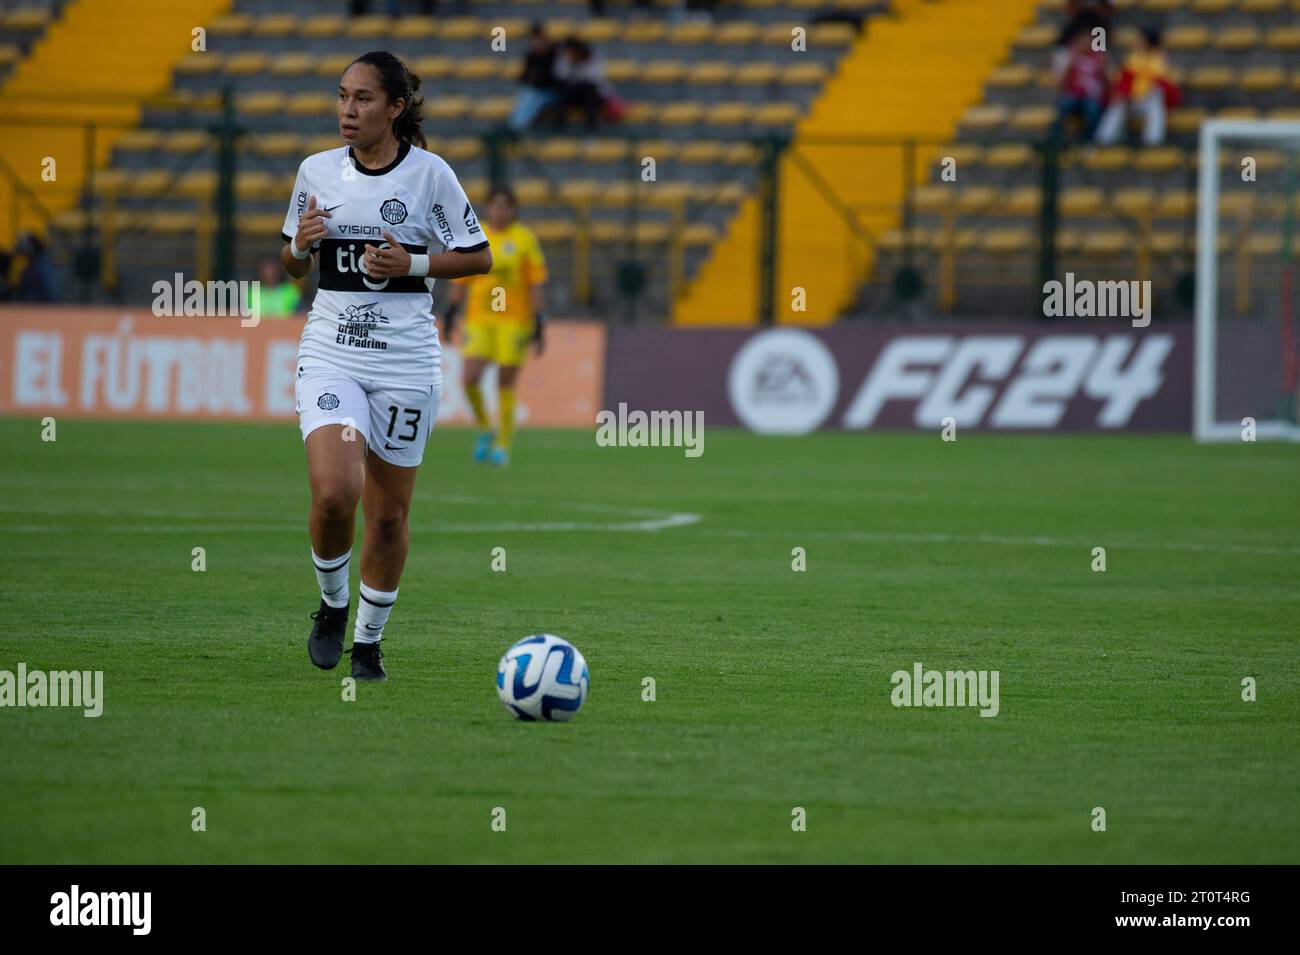 Bogota, Colombia. 08th Oct, 2023. Club Olimpia's Maria de los Angeles Segovia during the group phase match between Paraguay's Club Olimpia (1) and Club Universidad de Chile (2) during the Copa Libertadores Femenina, in Bogota, Colombia, October 8, 2023. Photo by: Chepa Beltran/Long Visual Press Credit: Long Visual Press/Alamy Live News Stock Photo